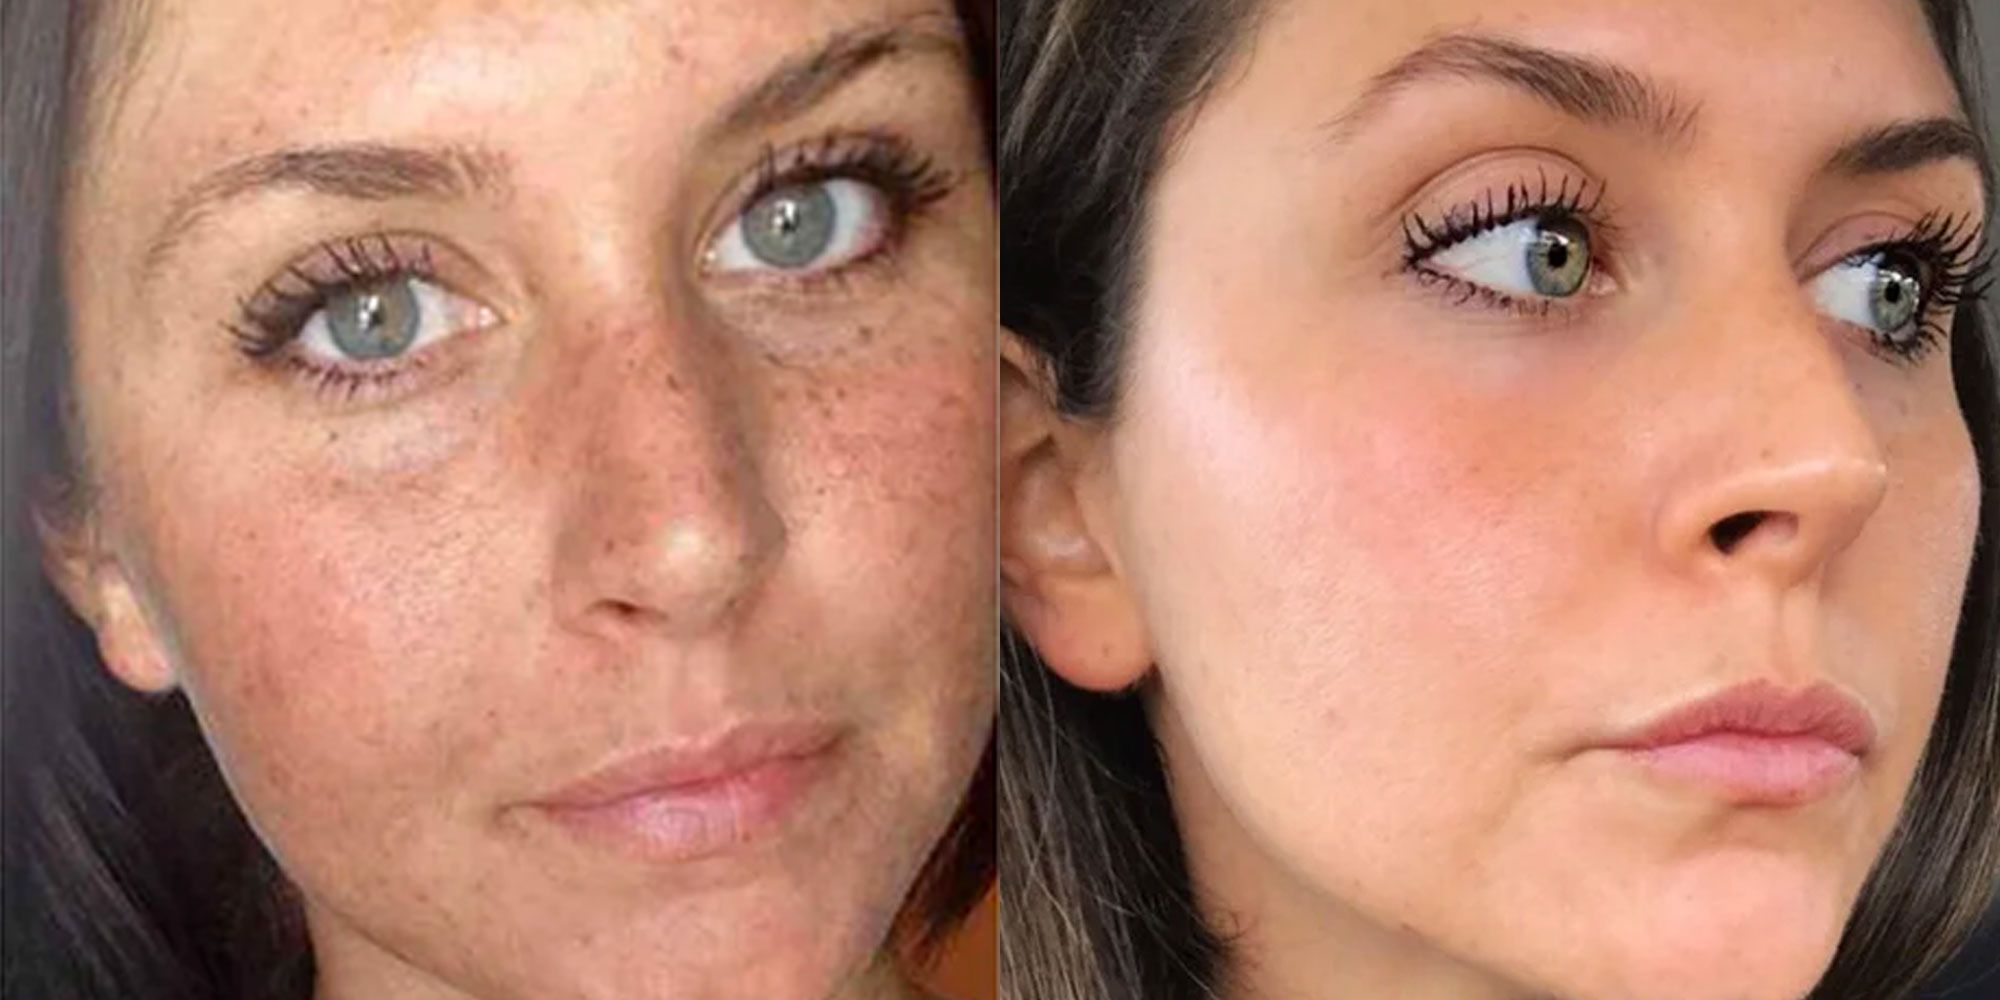 nægte Begge vokal This Woman's Reddit Before-And-After Sun Damage Photo Is Going Viral